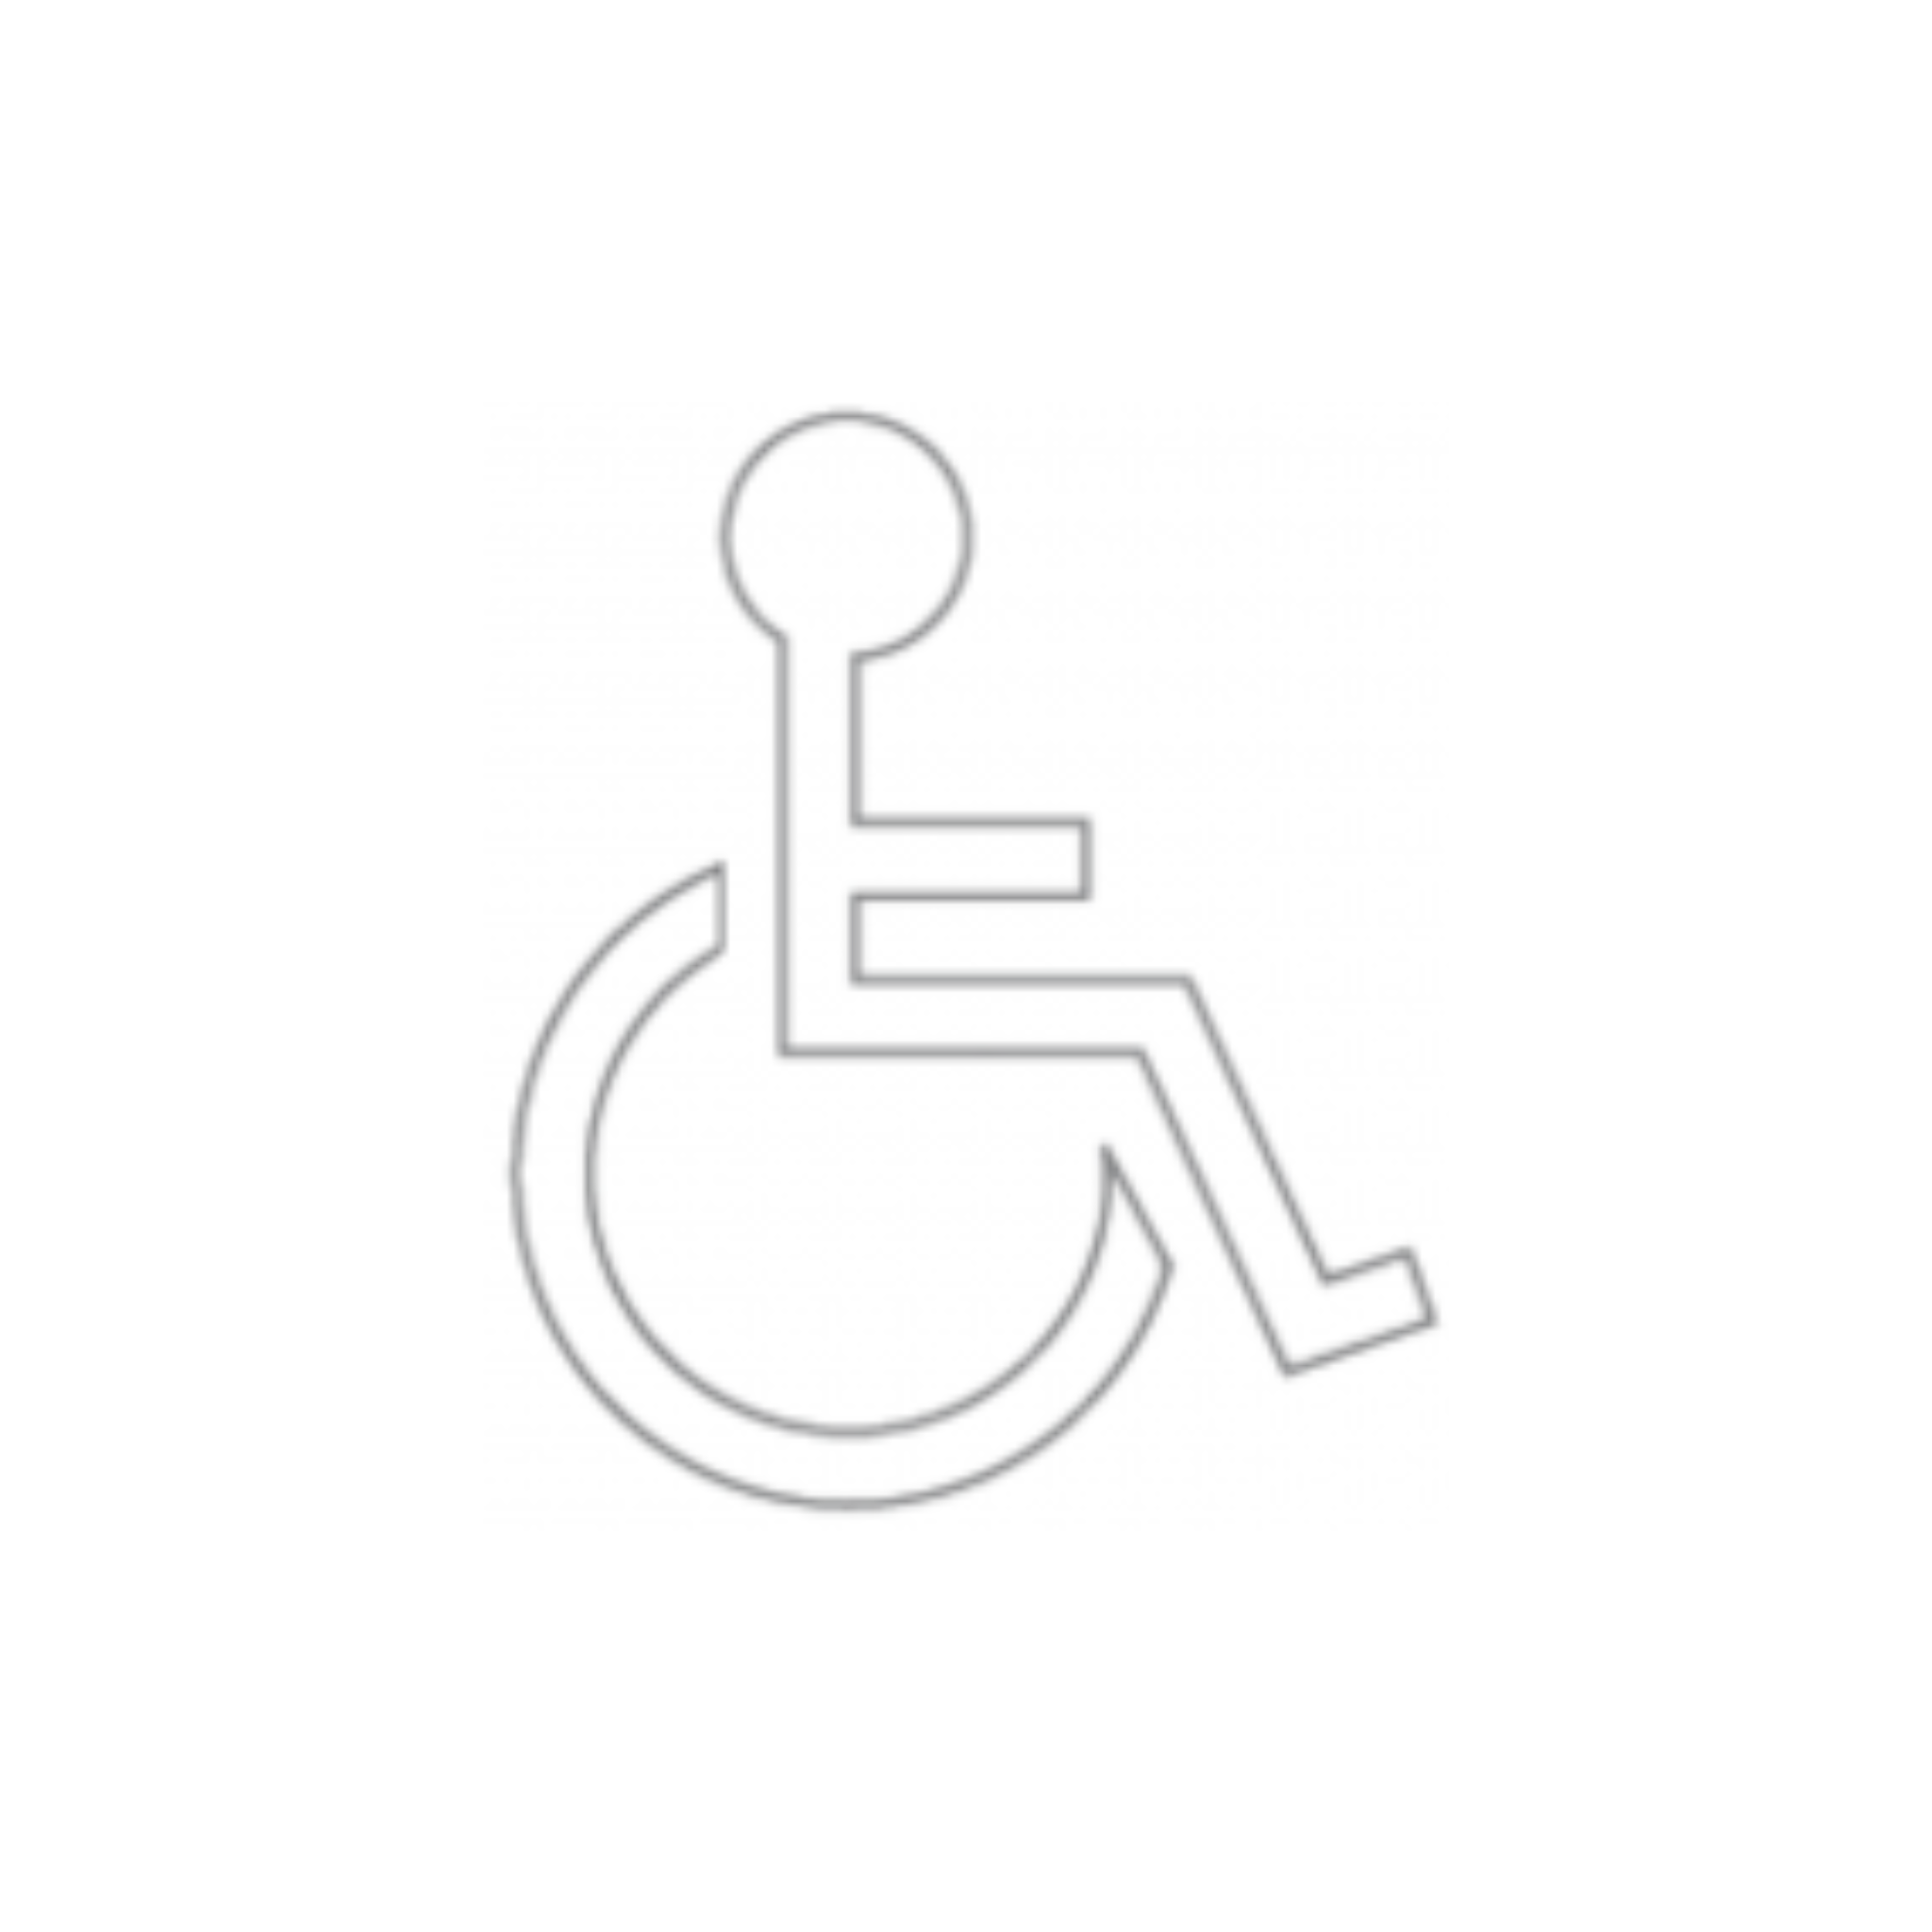 Disabled, Round, Laser Cut, Sign, 75mm x 75mm, Stainless Steel, QS